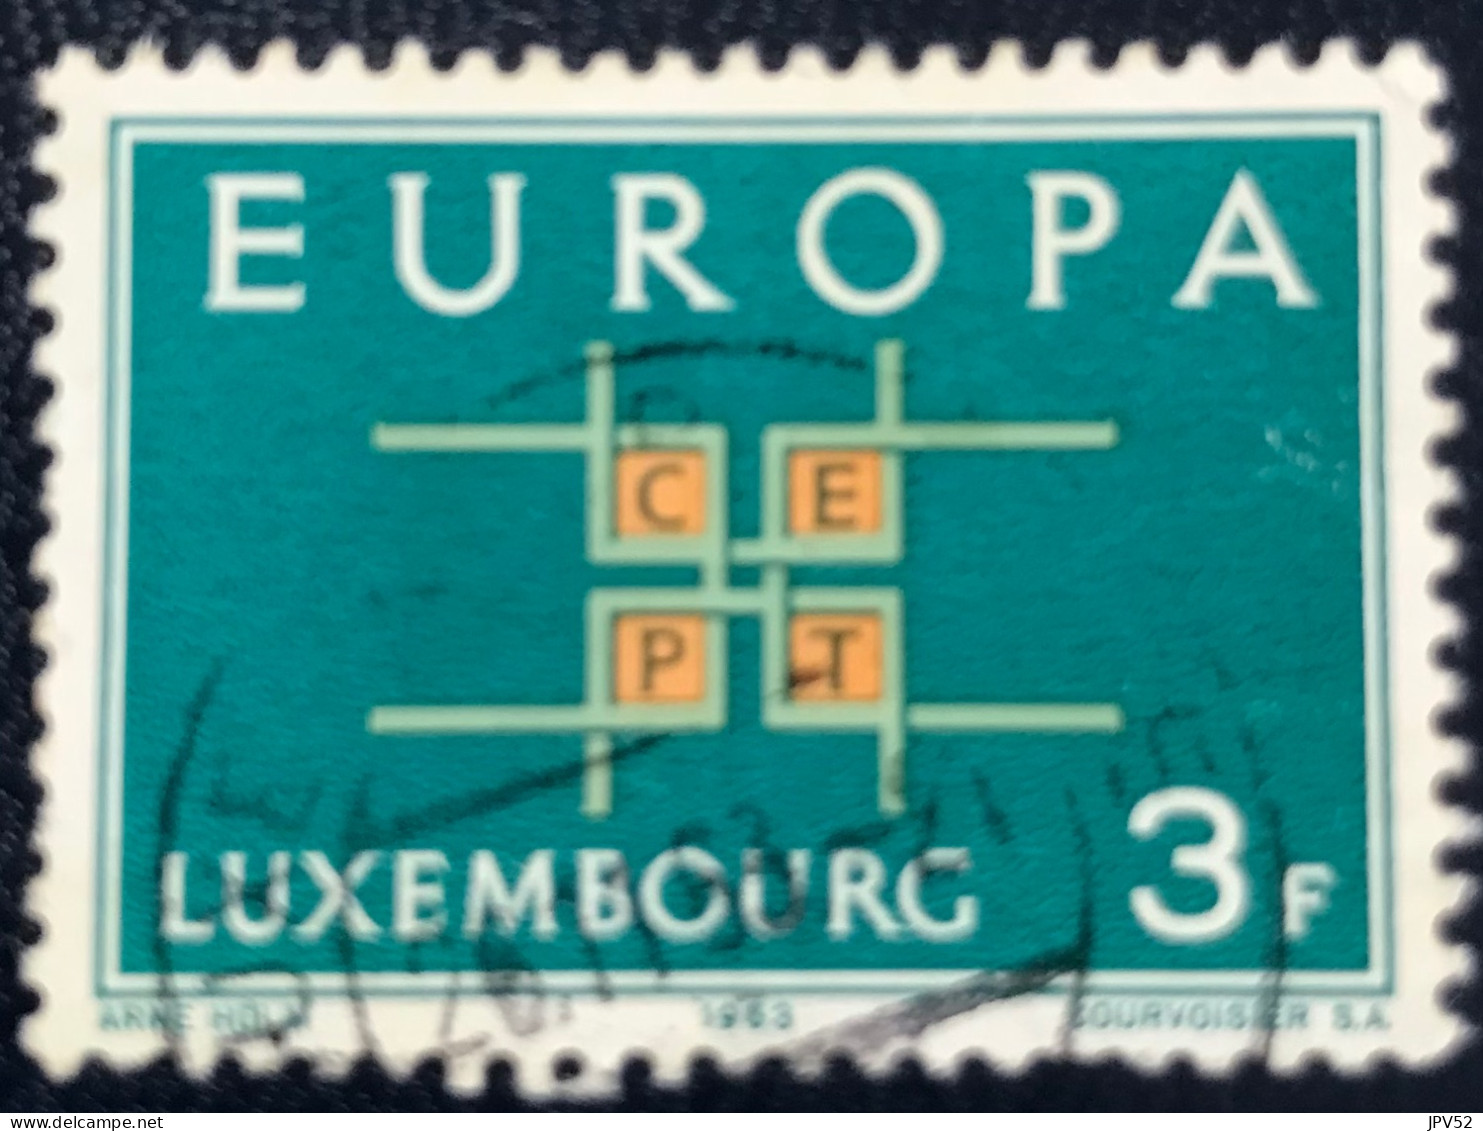 Luxembourg - Luxemburg - C18/31 - 1963 - (°)used - Michel 680 - Europa - CEPT - Used Stamps